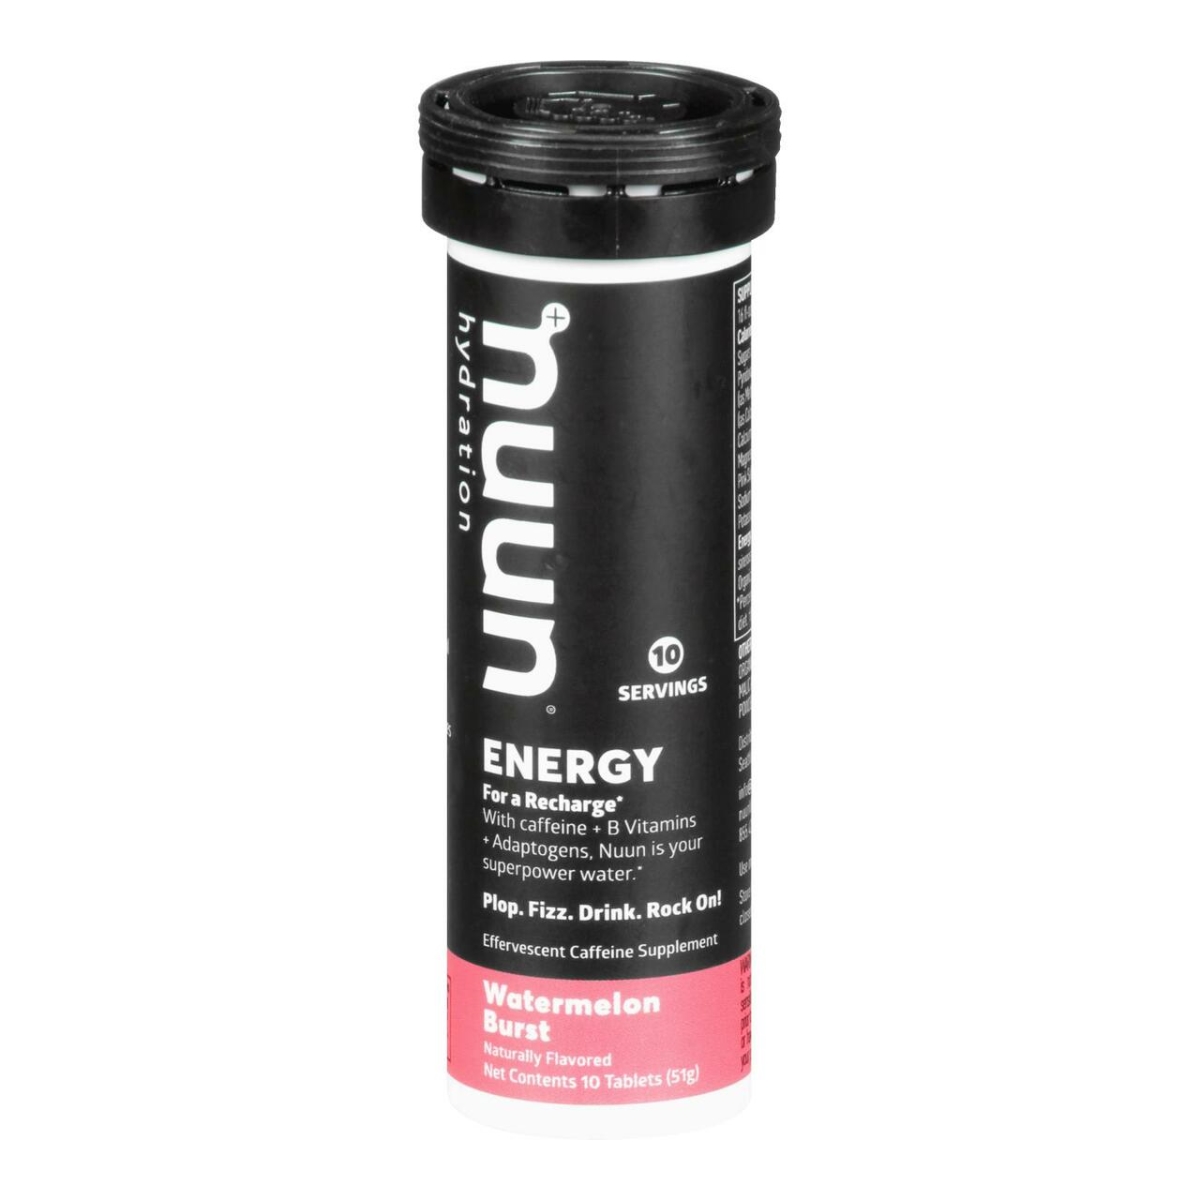 Picture of Nuun HG2678258 Energy Watermelon Burst - Case of 8 - 10 Count